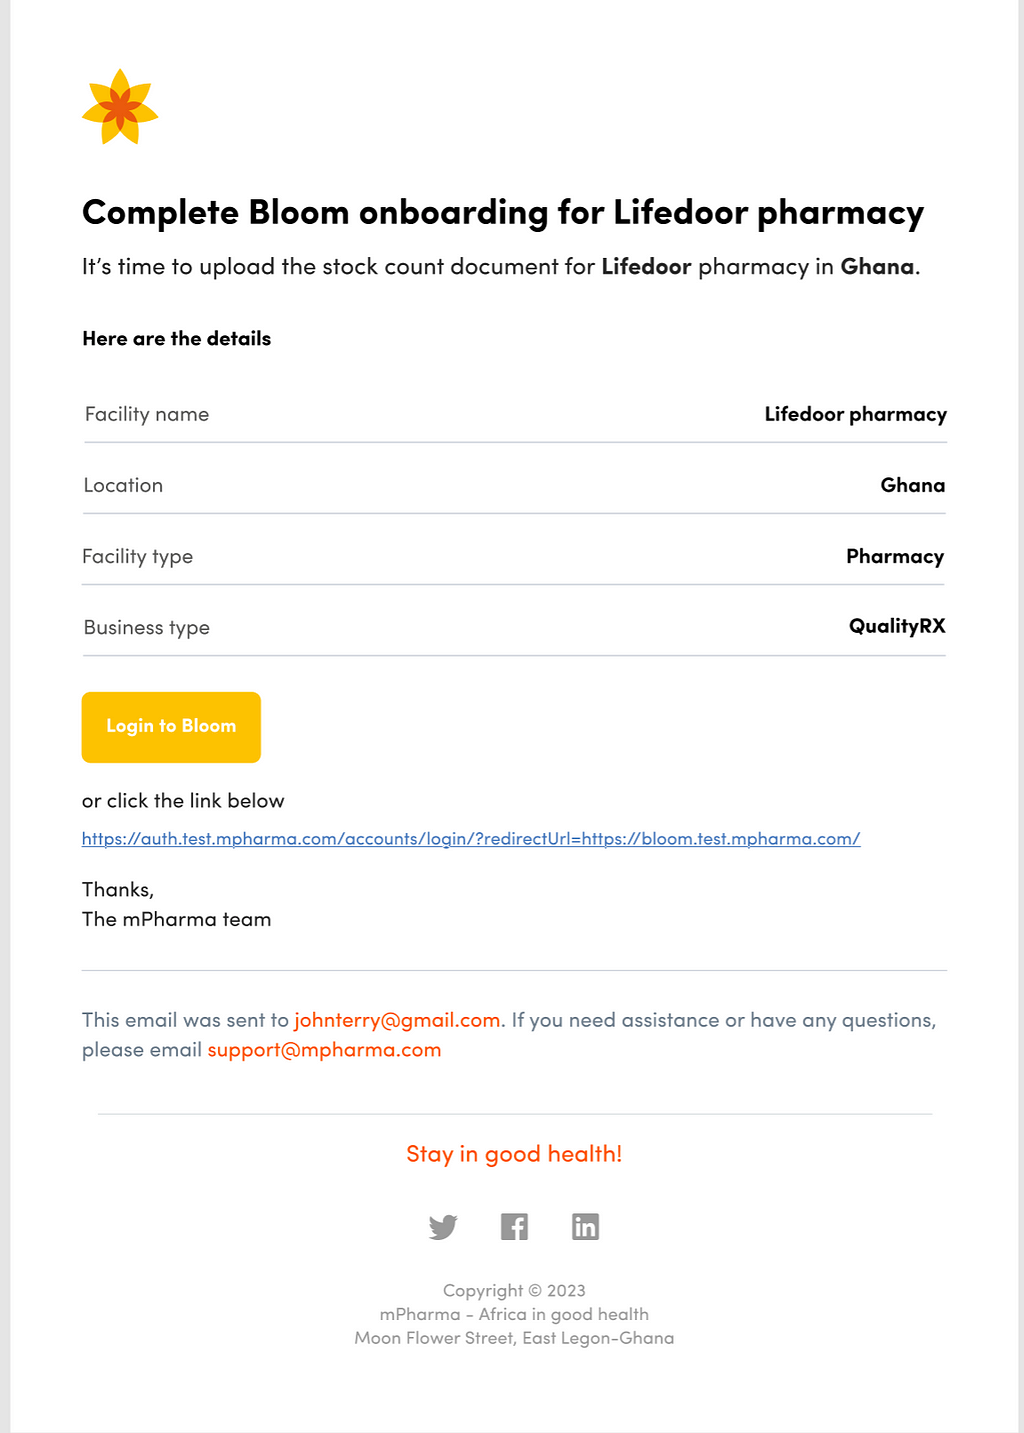 Email template prompting a user to “Login to Bloom” to upload a document